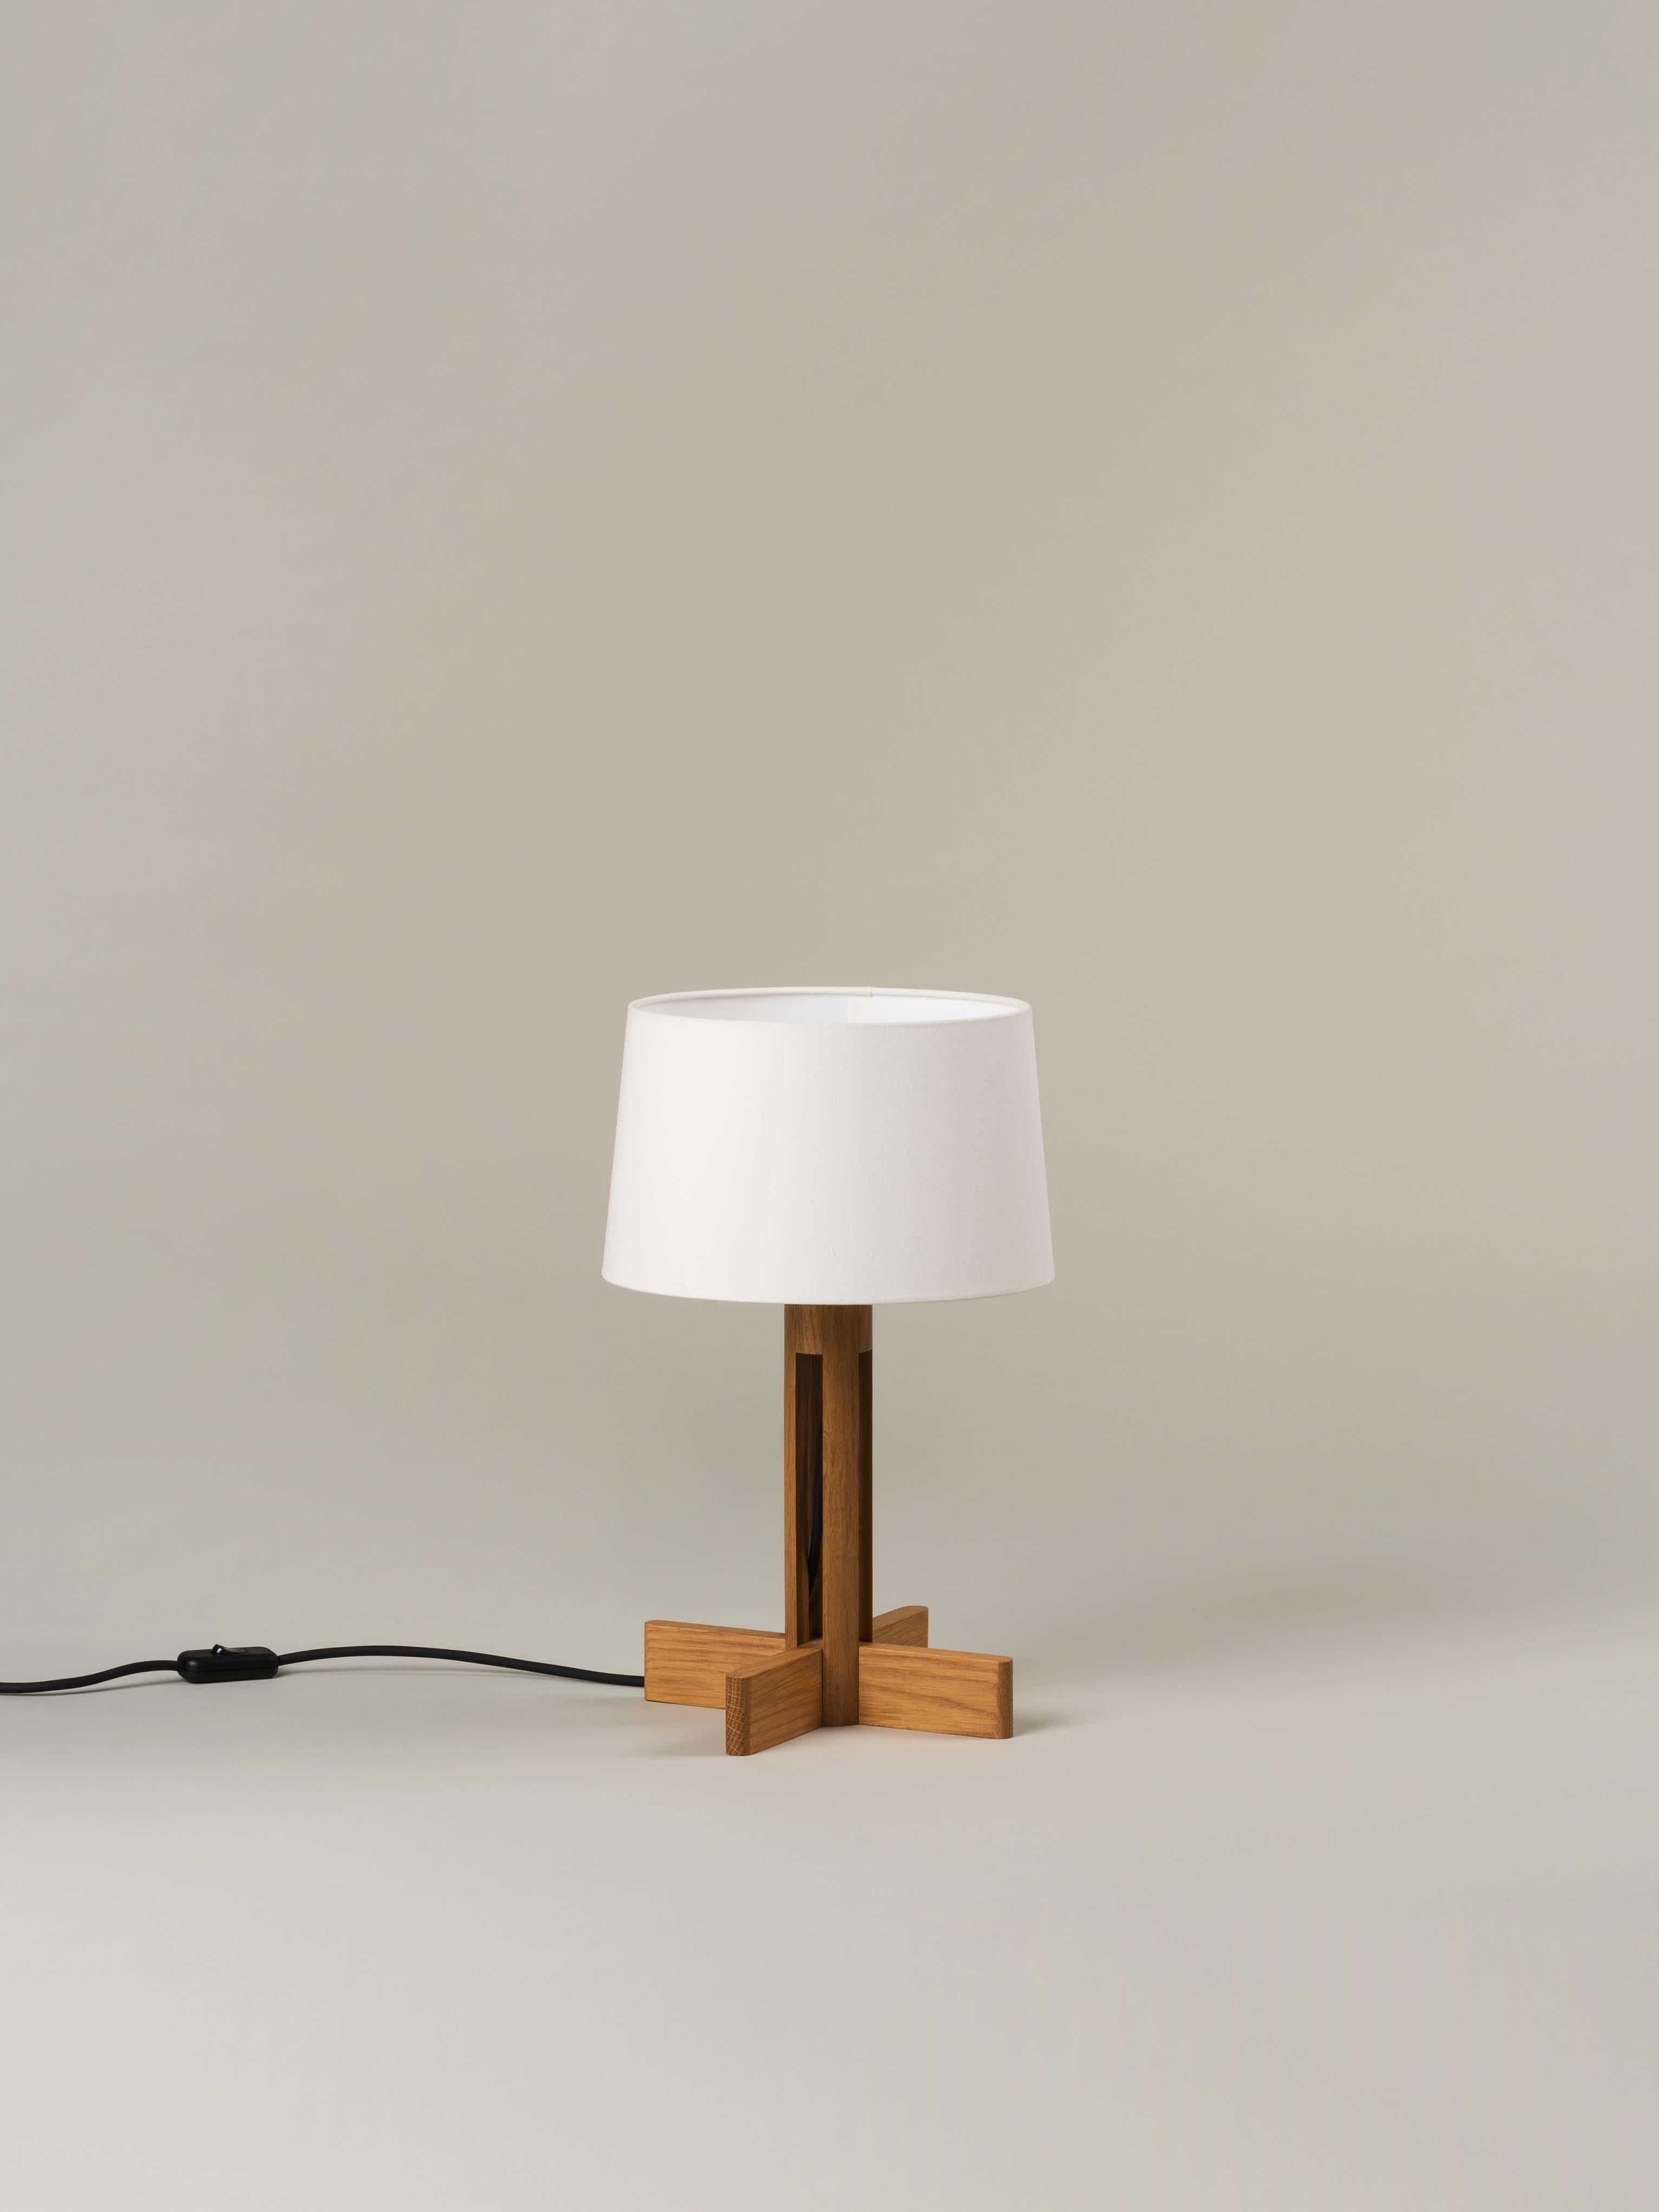 FAD Menor table lamp by Miguel Milá
Dimensions: D 26 x H 42 cm.
Materials: Linen, oak wood.

Miguel Milá got everything right compositionally with this demonstration of industrial craftsmanship. Its cylindrical oak column creates a vertical